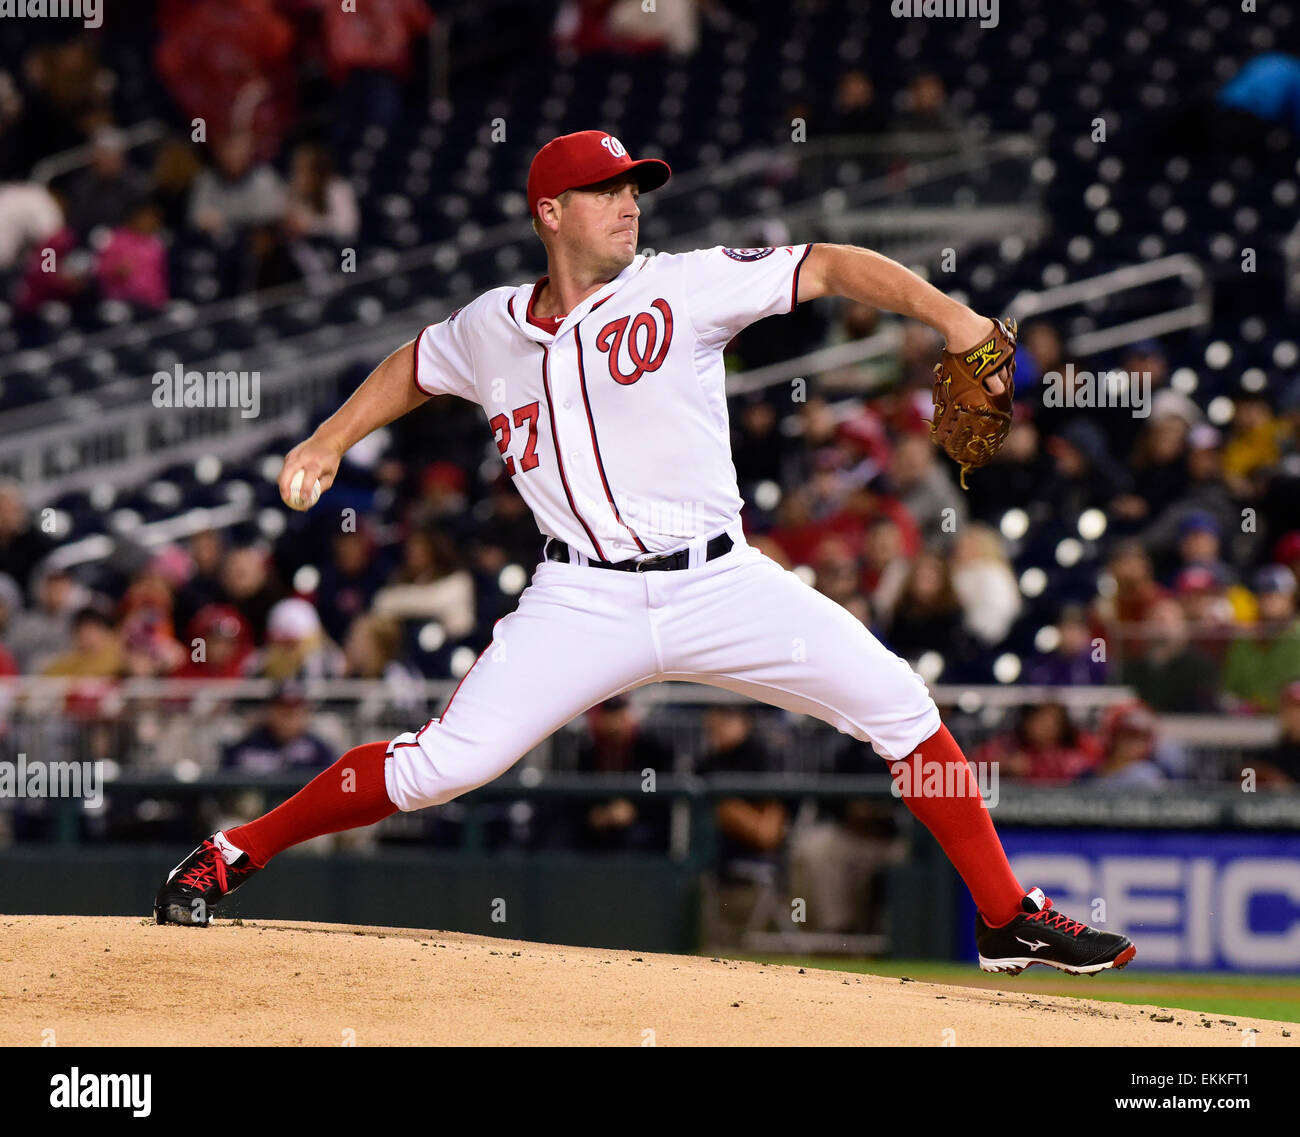 Washington Nationals pitcher Jordan Zimmermann (27) works in the first inning against the New York Mets at Nationals Park in Washington, DC on Wednesday, April 8, 2015. Credit: Ron Sachs/CNP (RESTRICTION: NO New York or New Jersey Newspapers or newspapers within a 75 mile radius of New York City) - NO WIRE SERVICE - Stock Photo